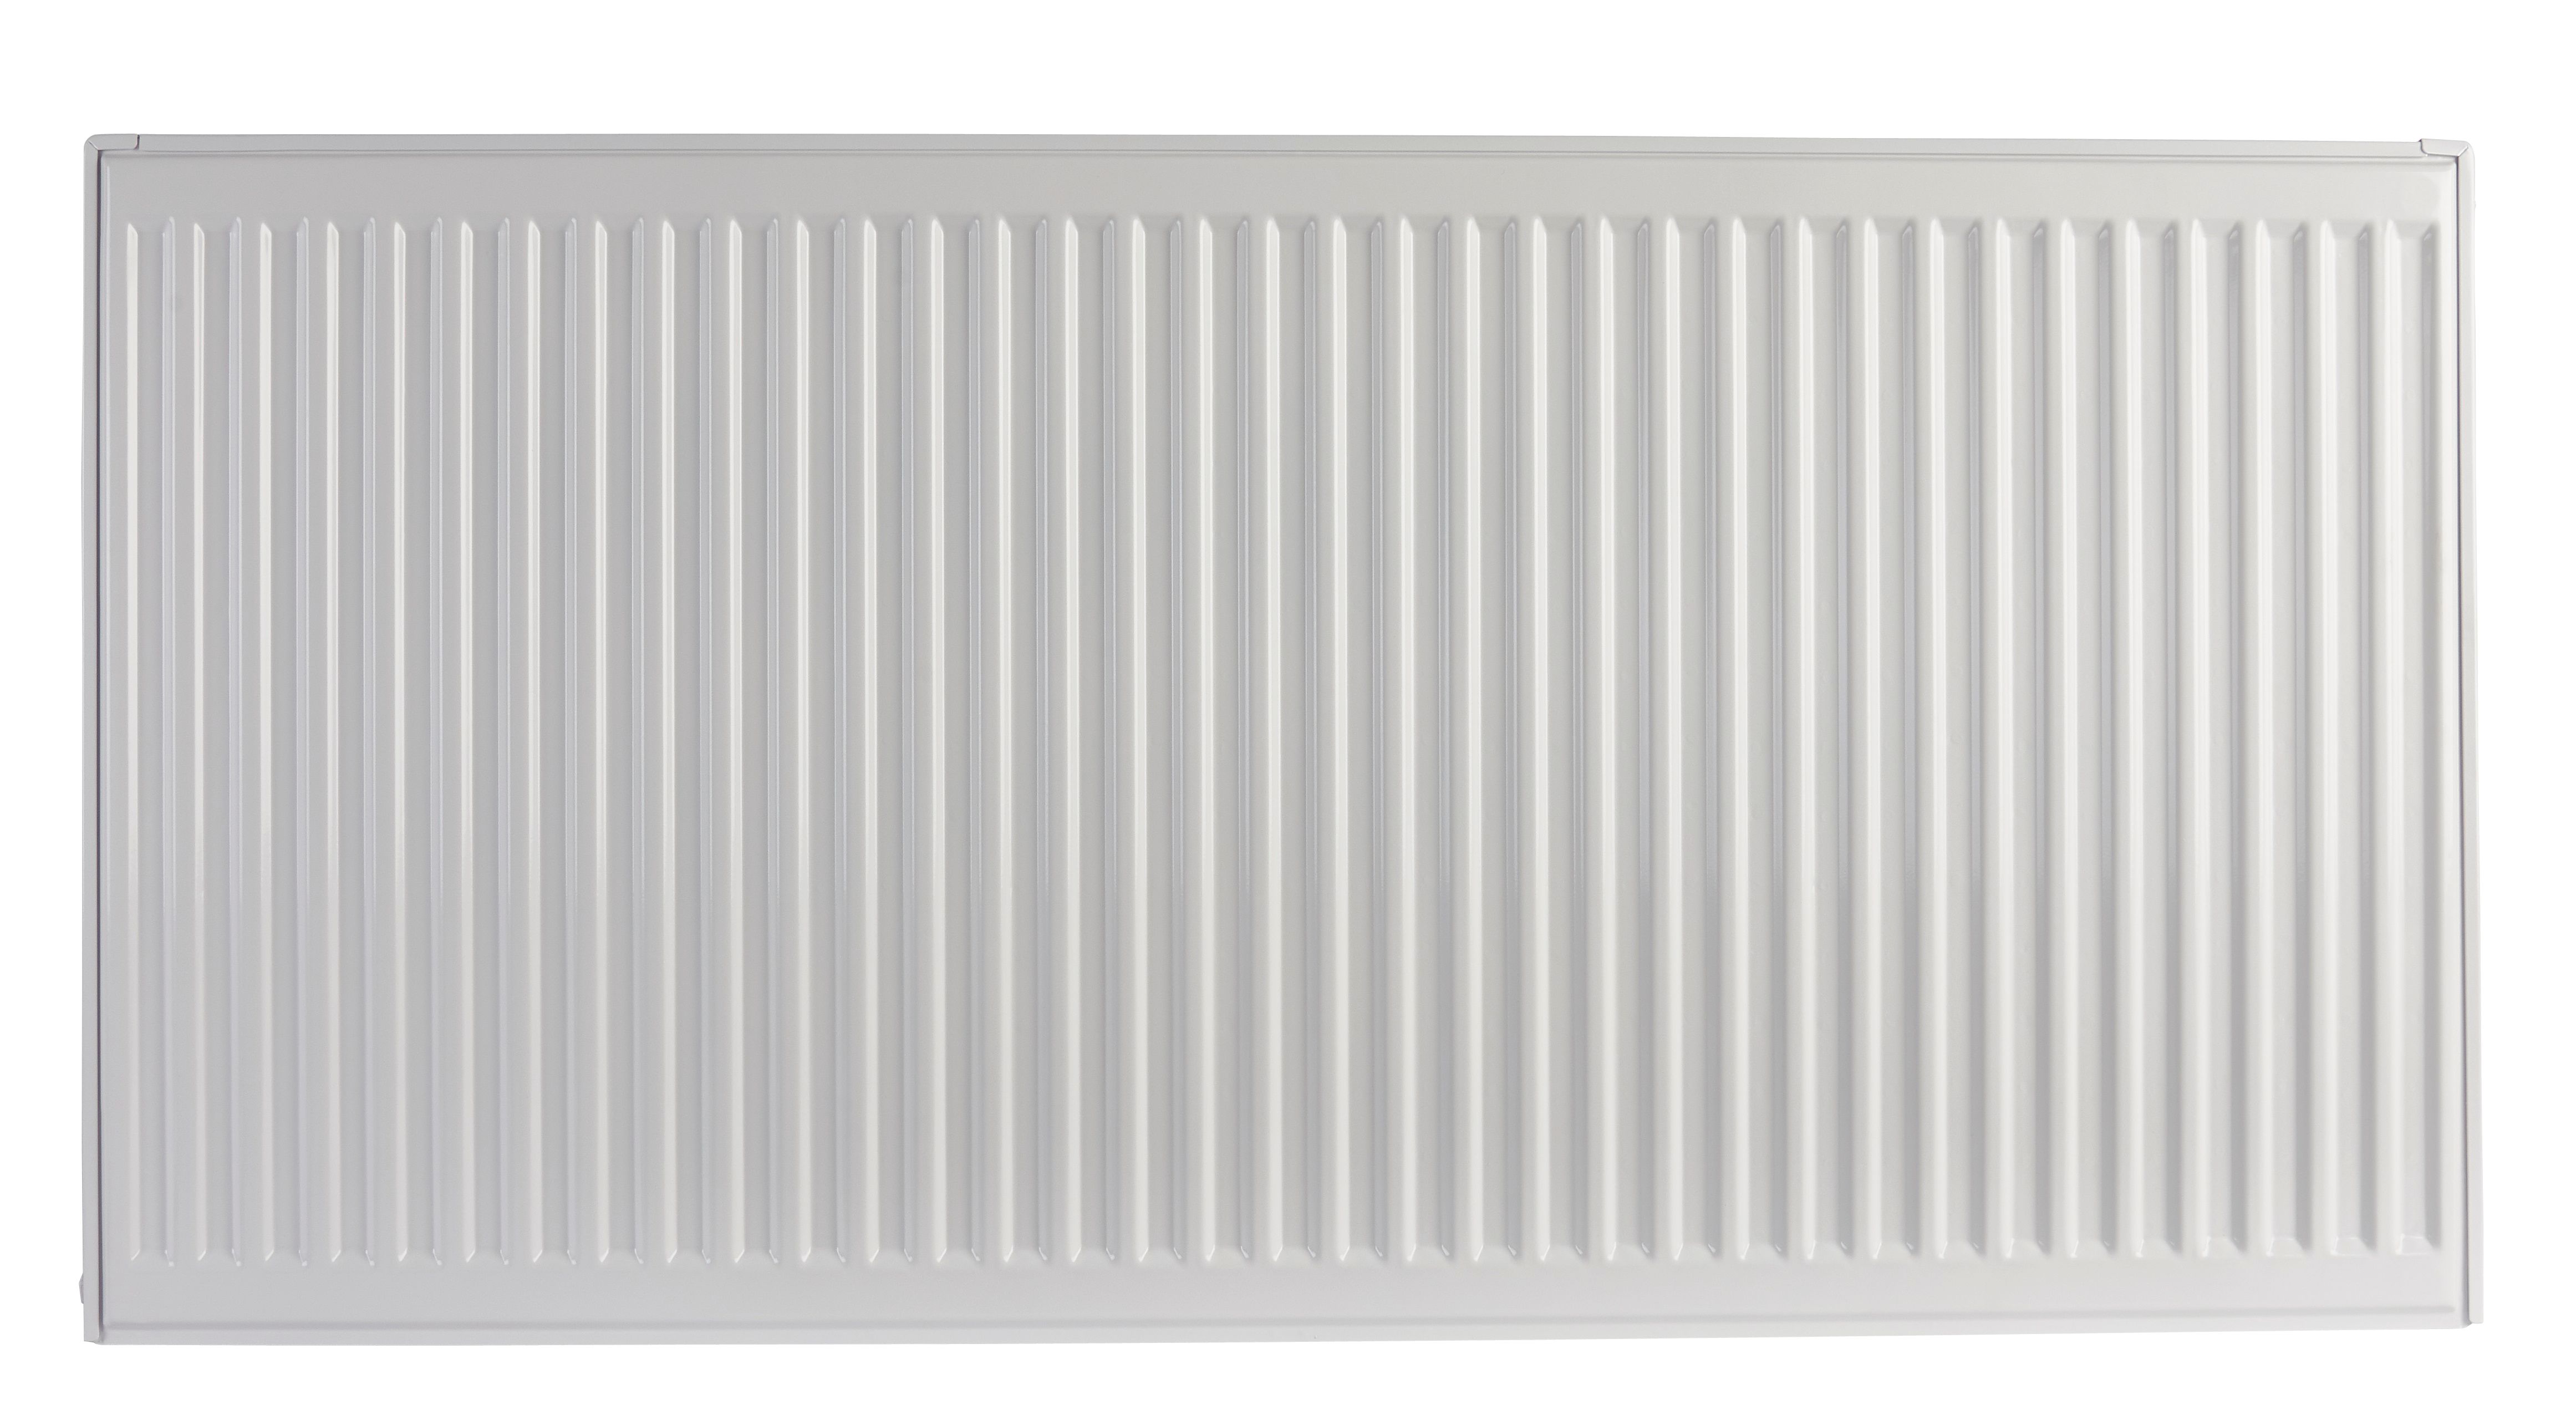 Image of Homeline by Stelrad 400 x 1000mm Type 22 Double Panel Premium Double Convector Radiator